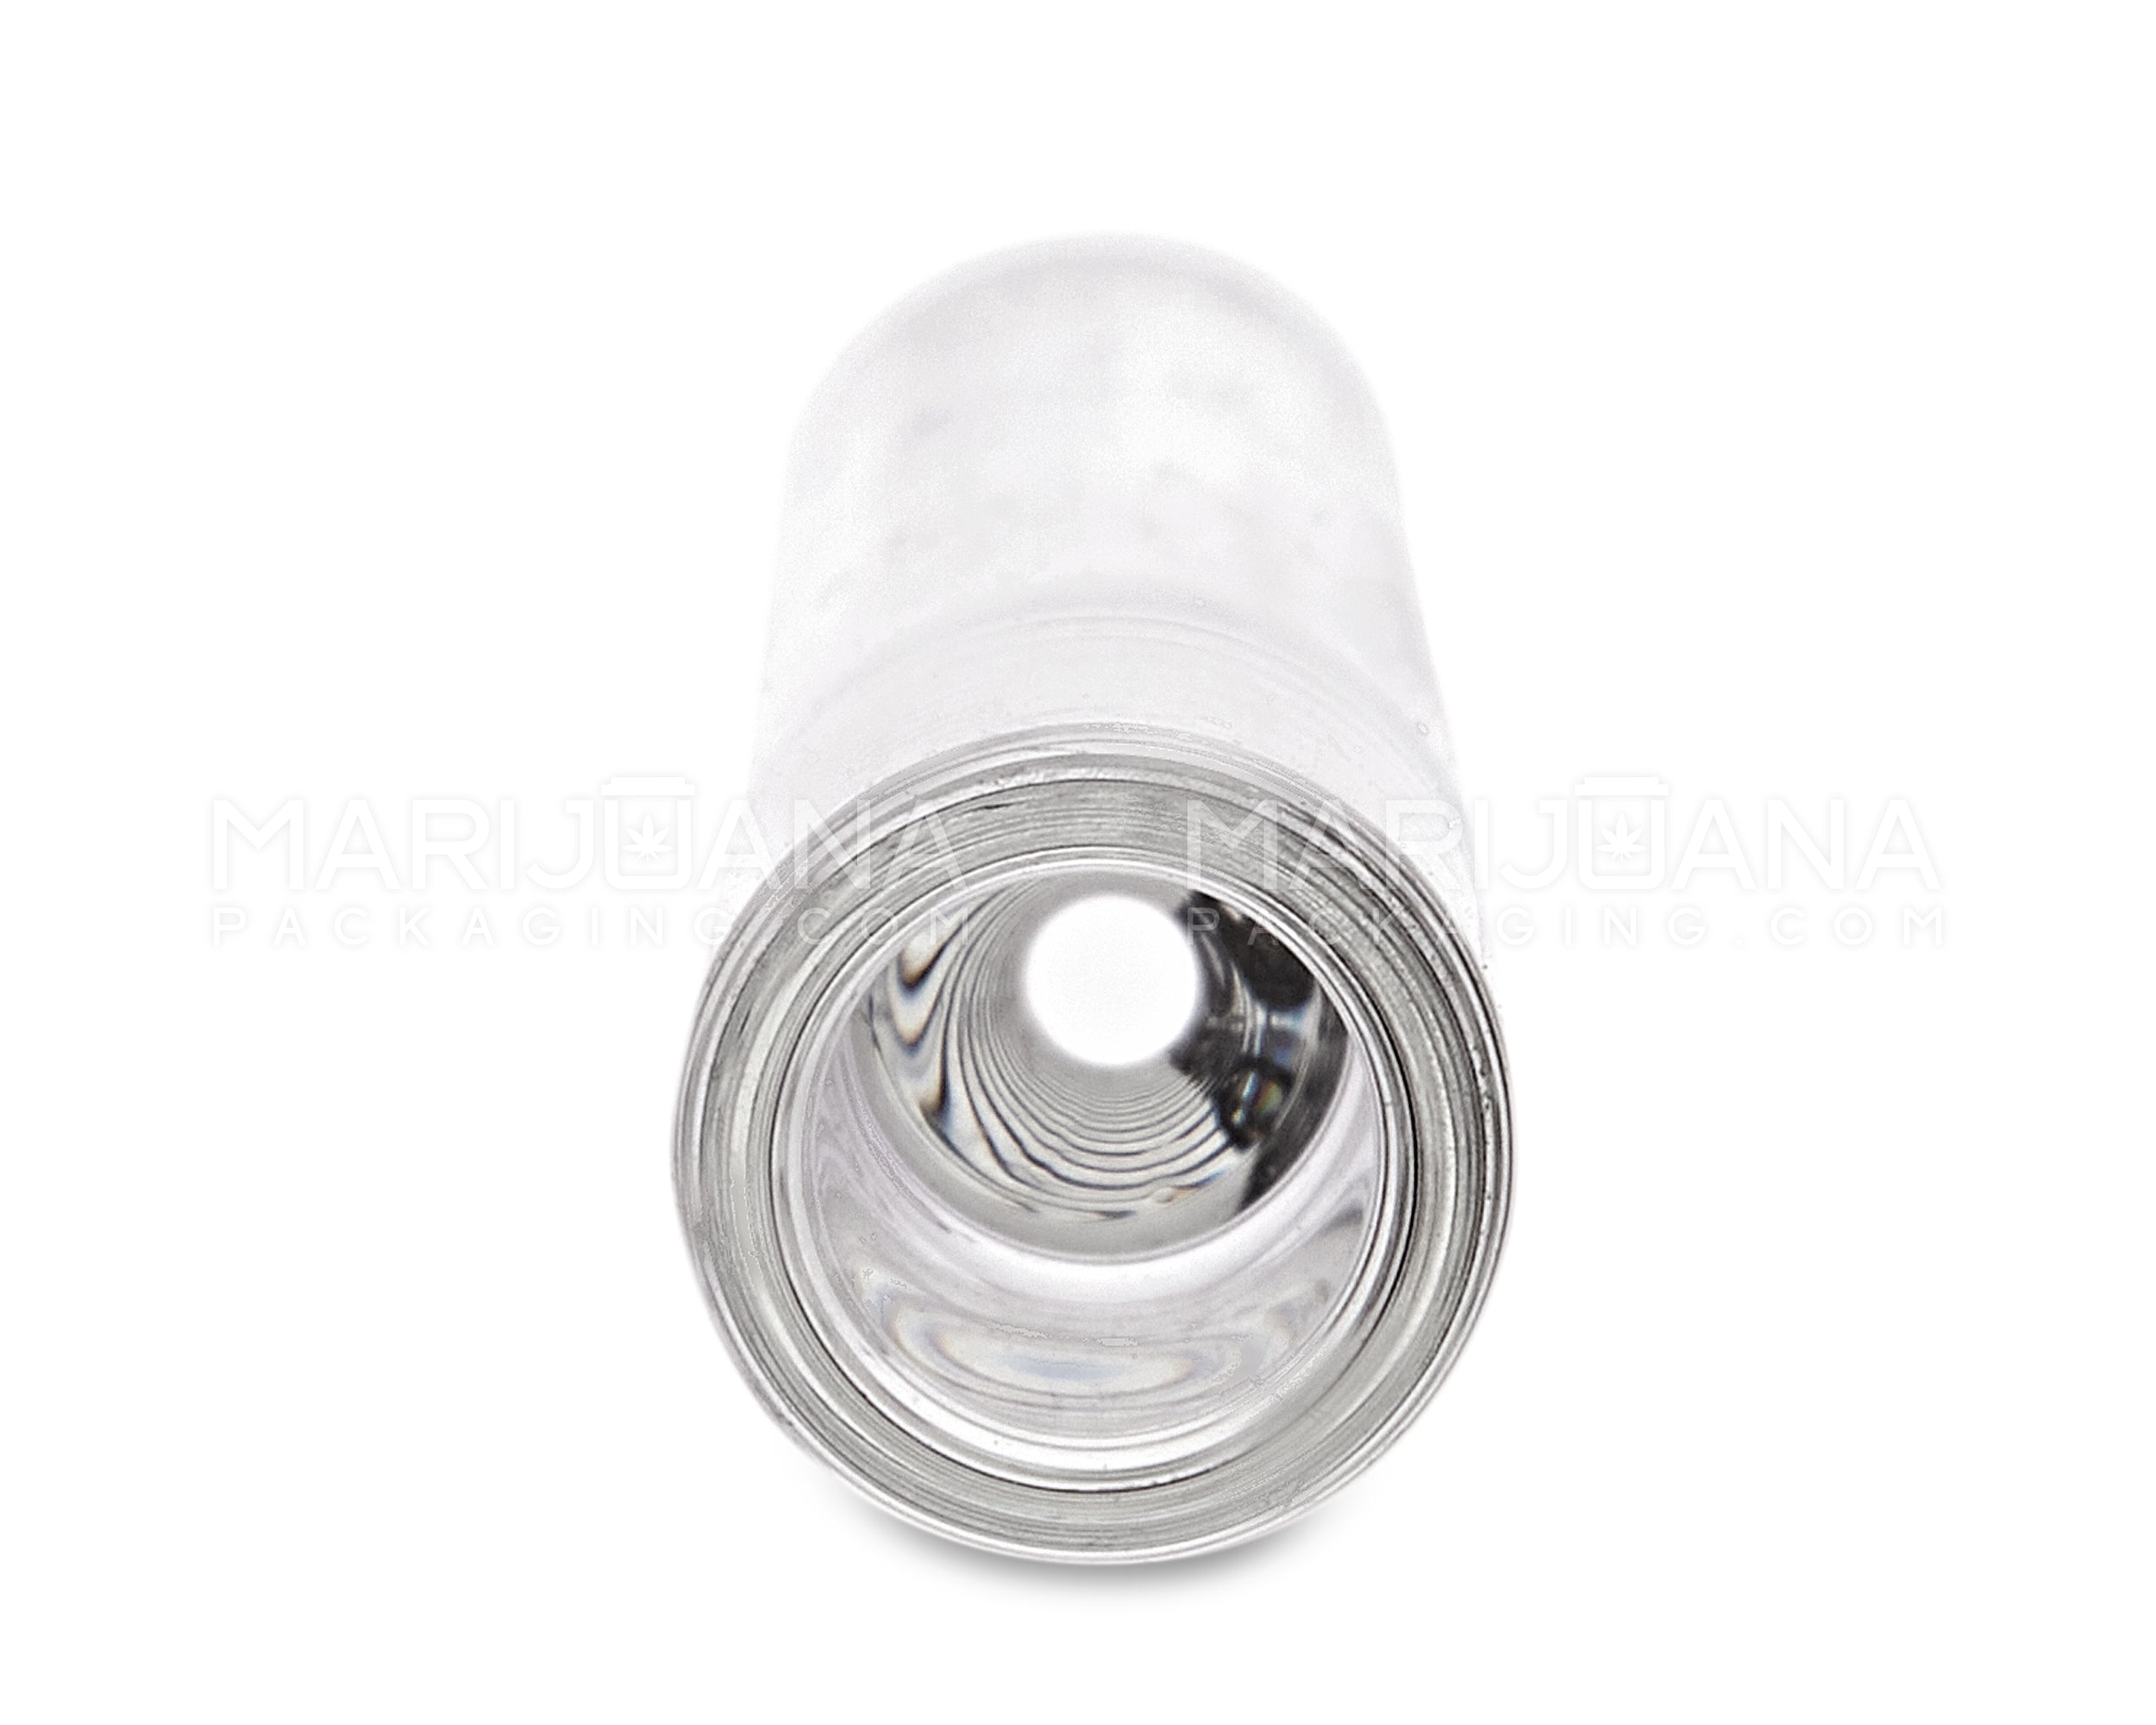 Display REFILL | USA Glass OG Chillum Hand Pipes | 4in Long - Glass - 100 Count - 3